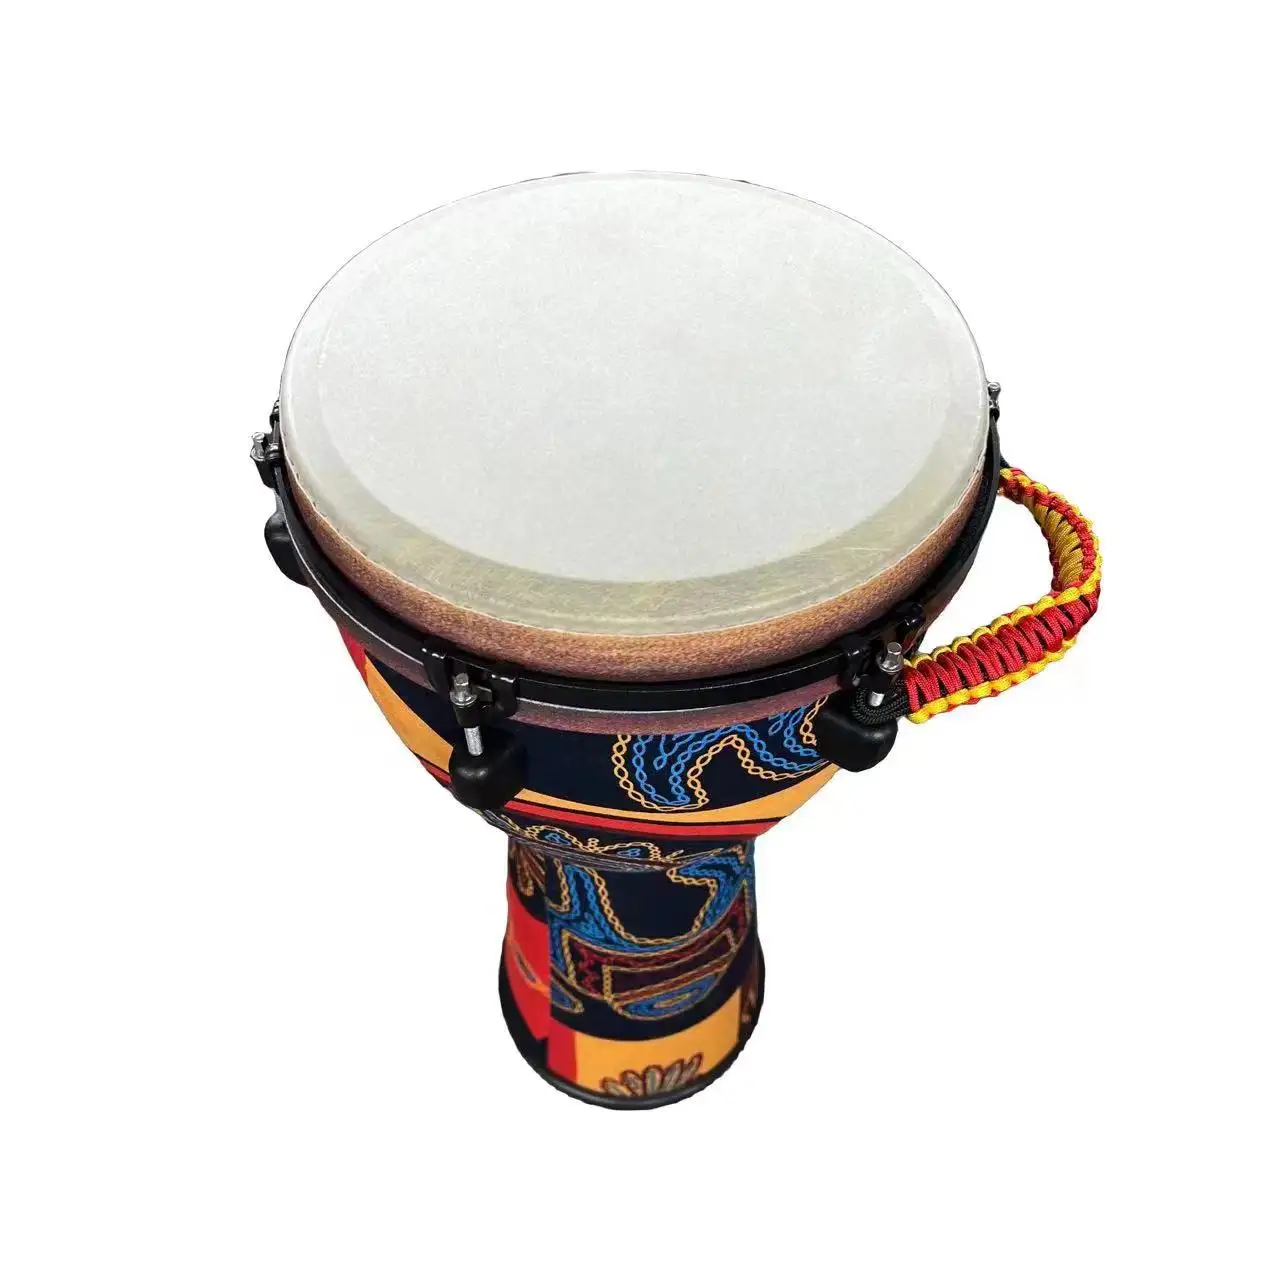 Mini Latin 3pcs Bcd Set Of Bongo Drums Conga Drums And Djembe Drums